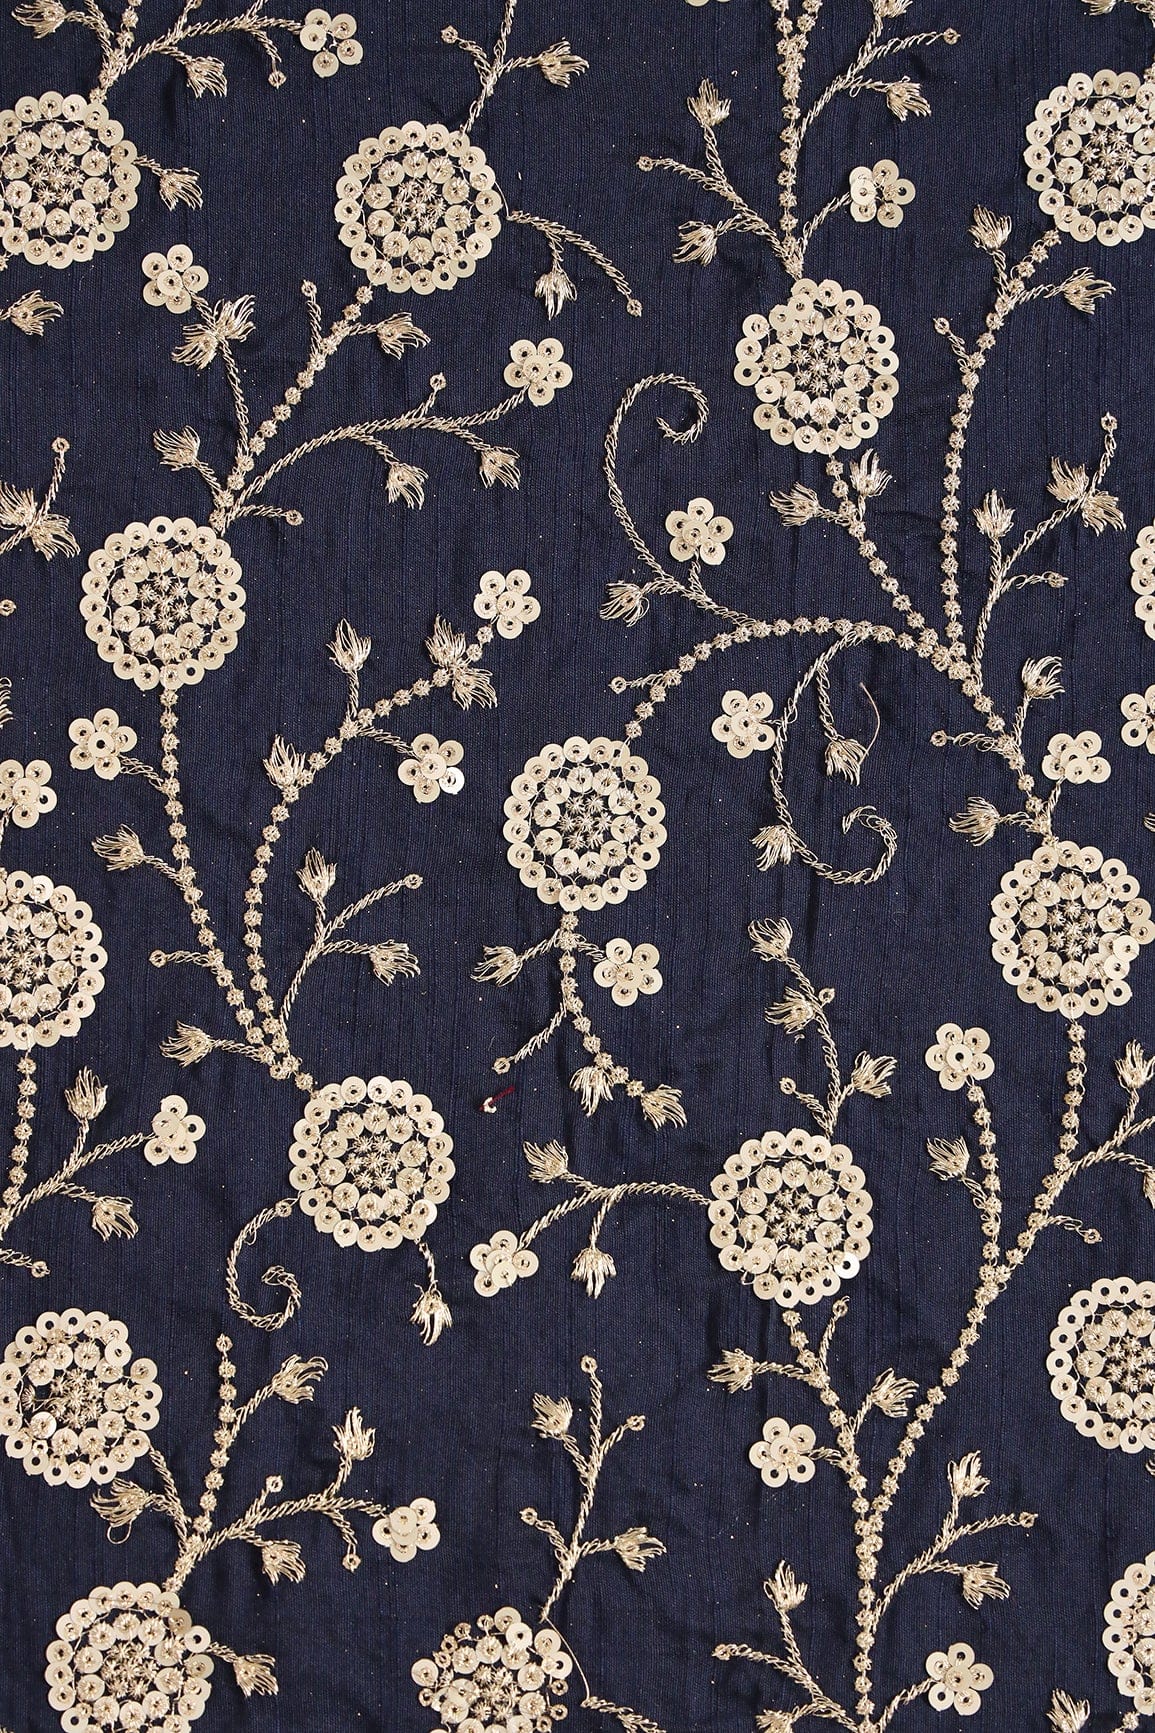 doeraa Embroidery Fabrics Gold Zari With Gold Sequins Beautiful Floral Embroidery Work On Navy Blue Raw Silk Fabric